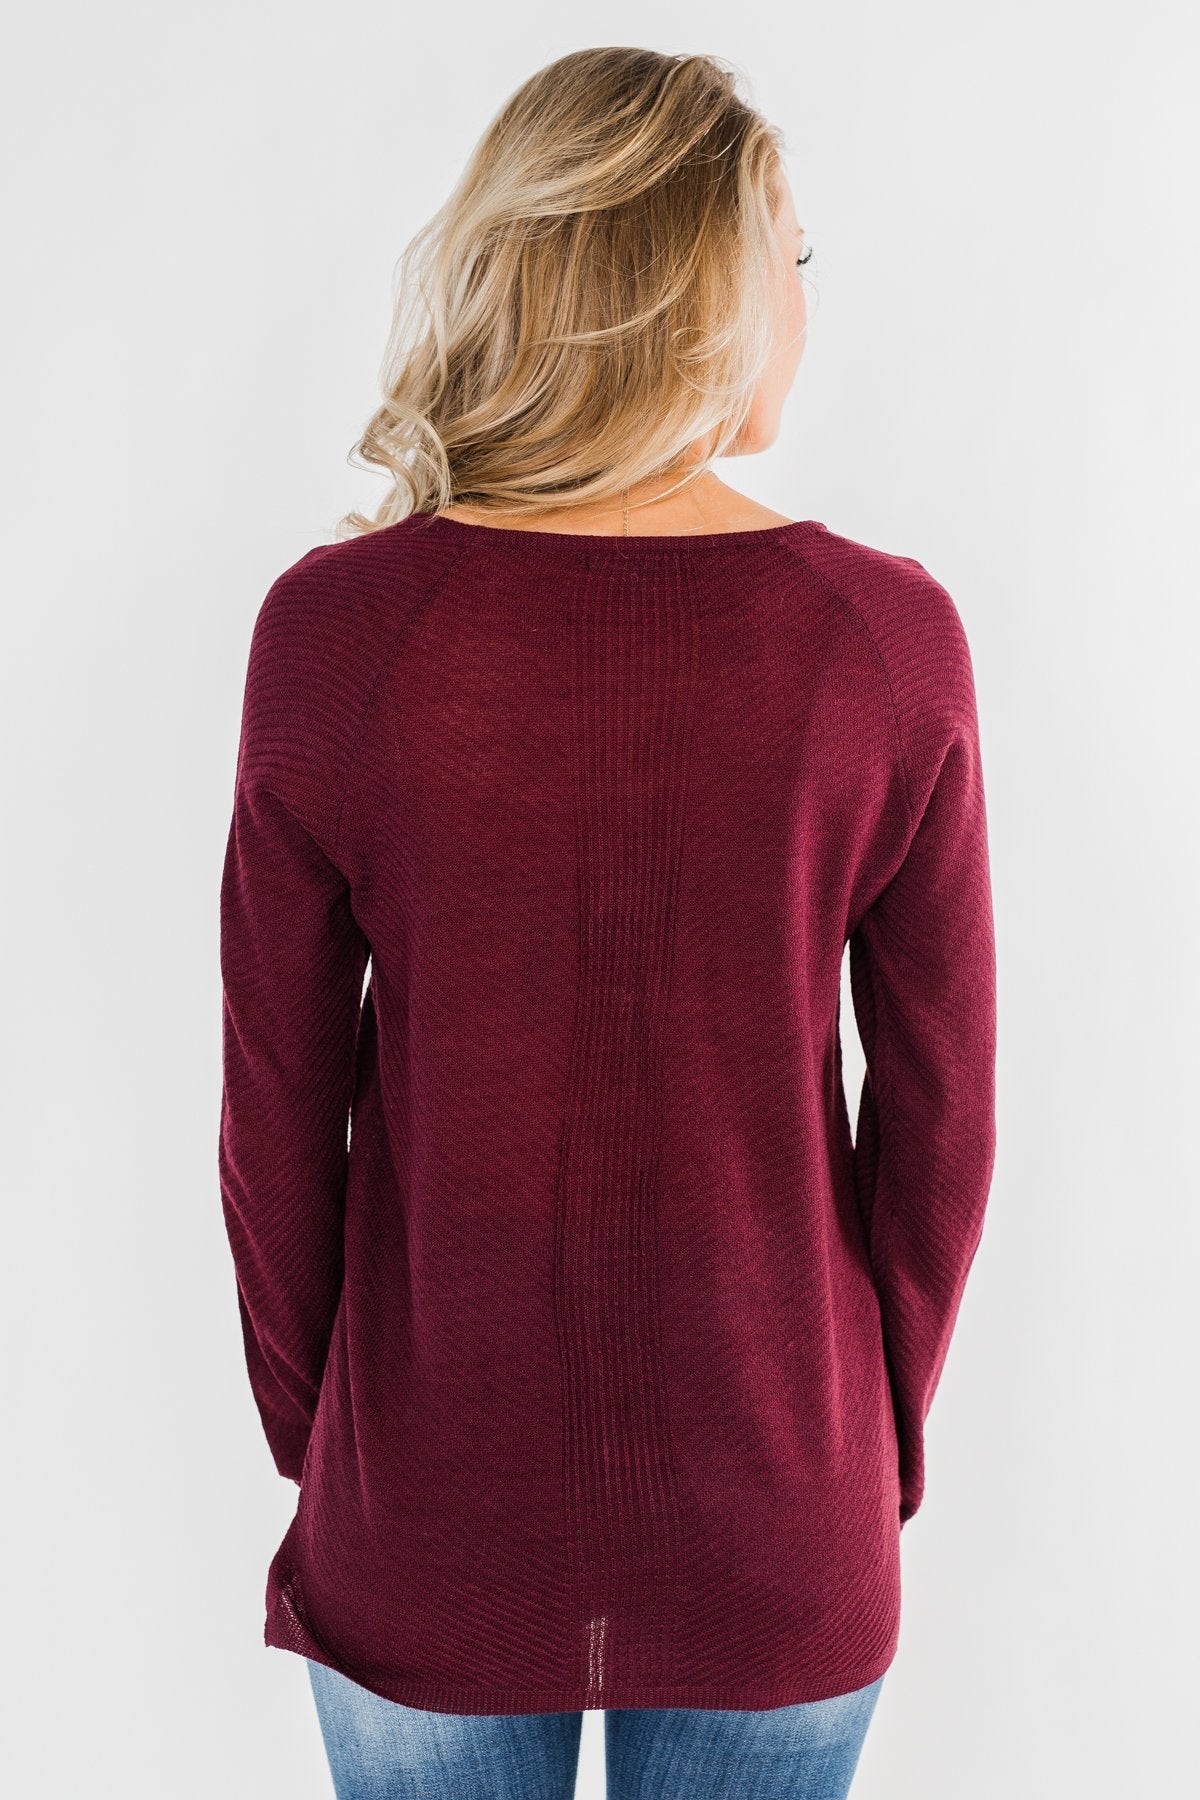 Spread The Love Knit Sweater- Burgundy